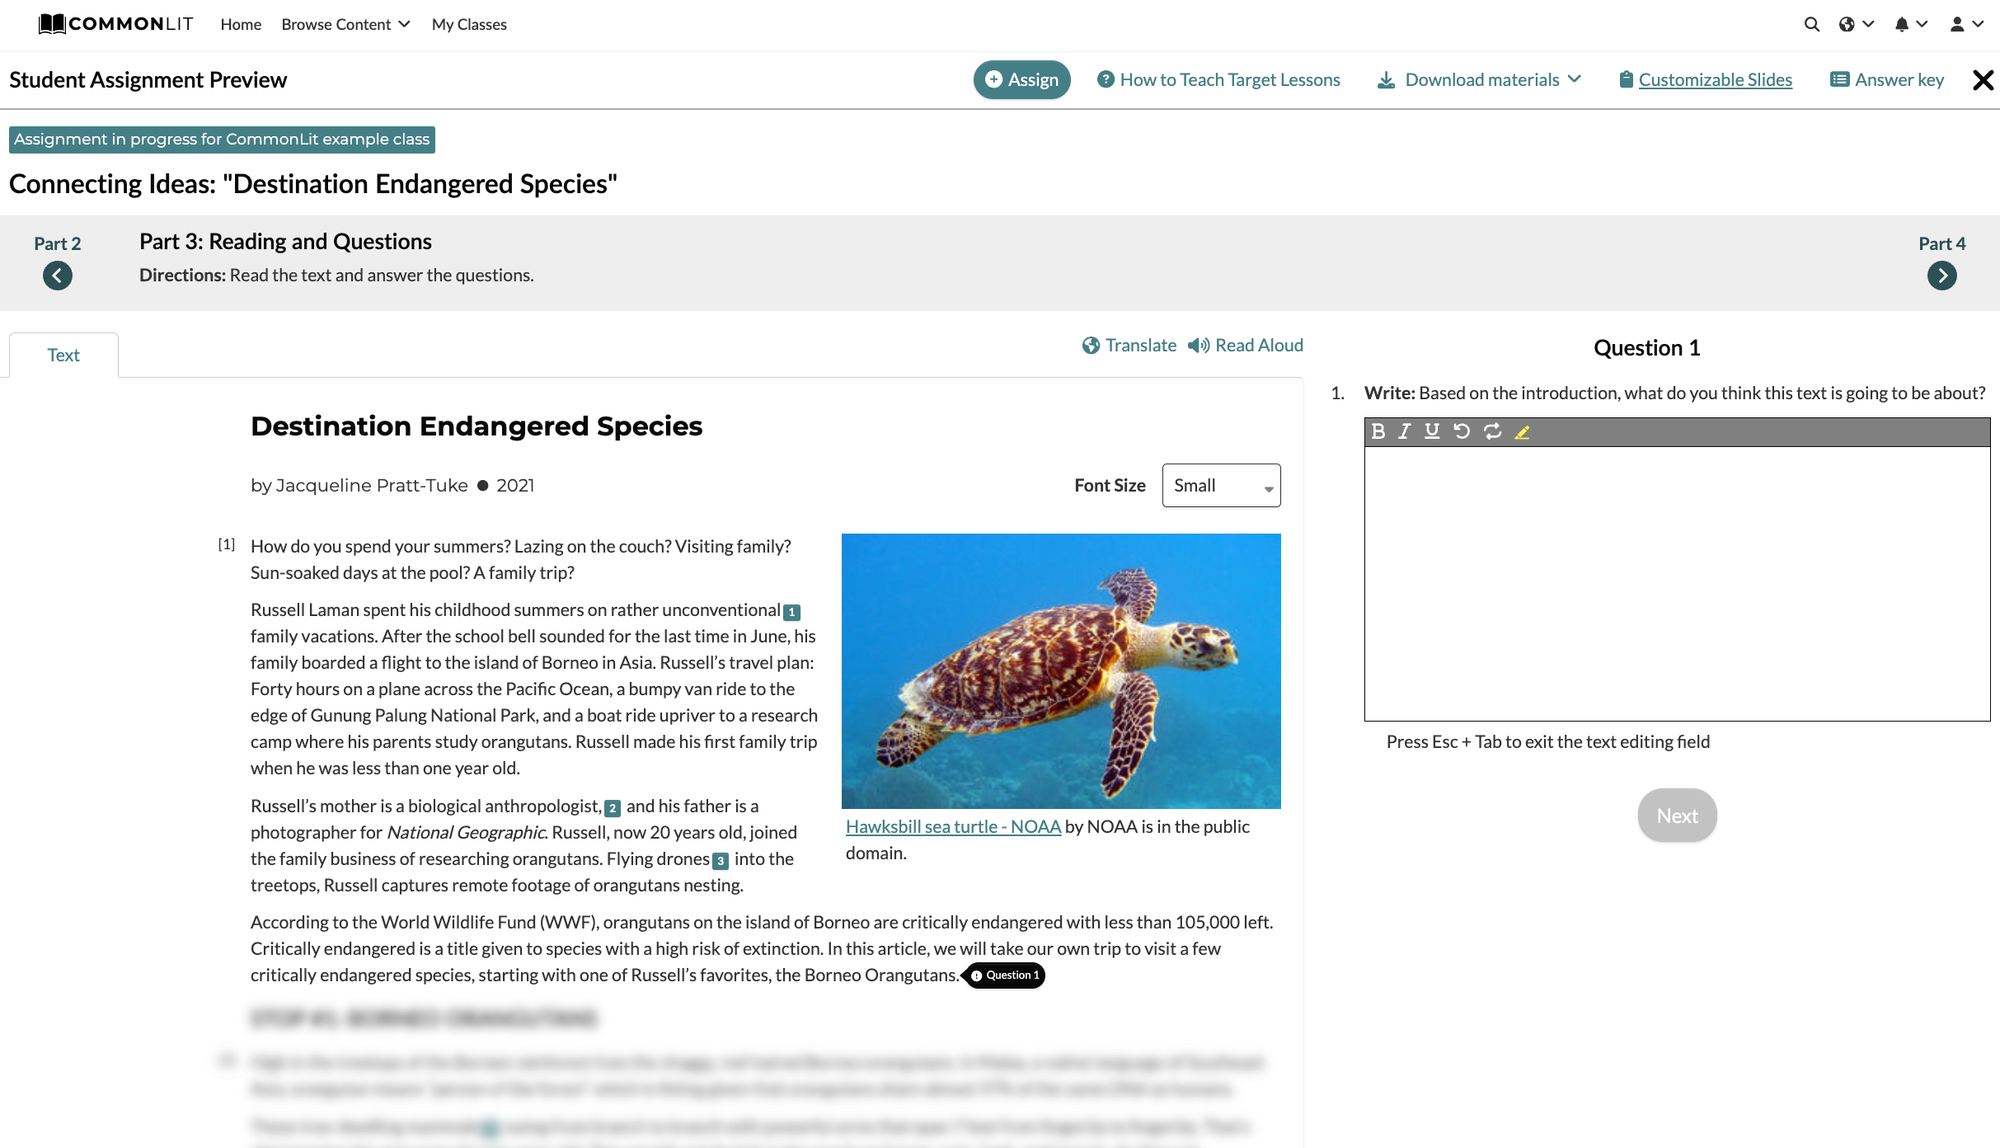 Screenshot of "Reading and Questions" section of "Destination Endangered Species" lesson